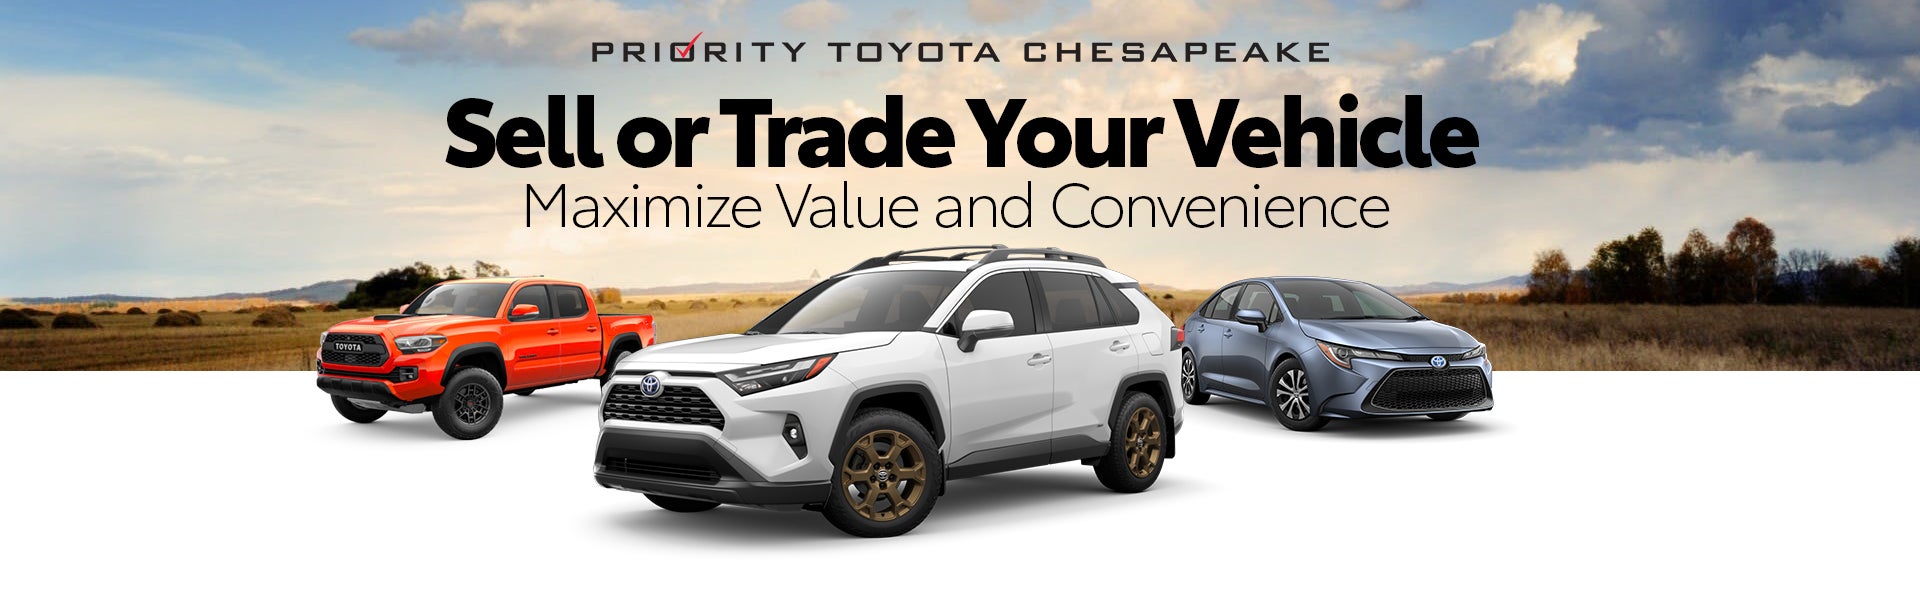 Maximize Value and Convenience: Sell or Trade Your Vehicle at Priority Toyota Chesapeake 